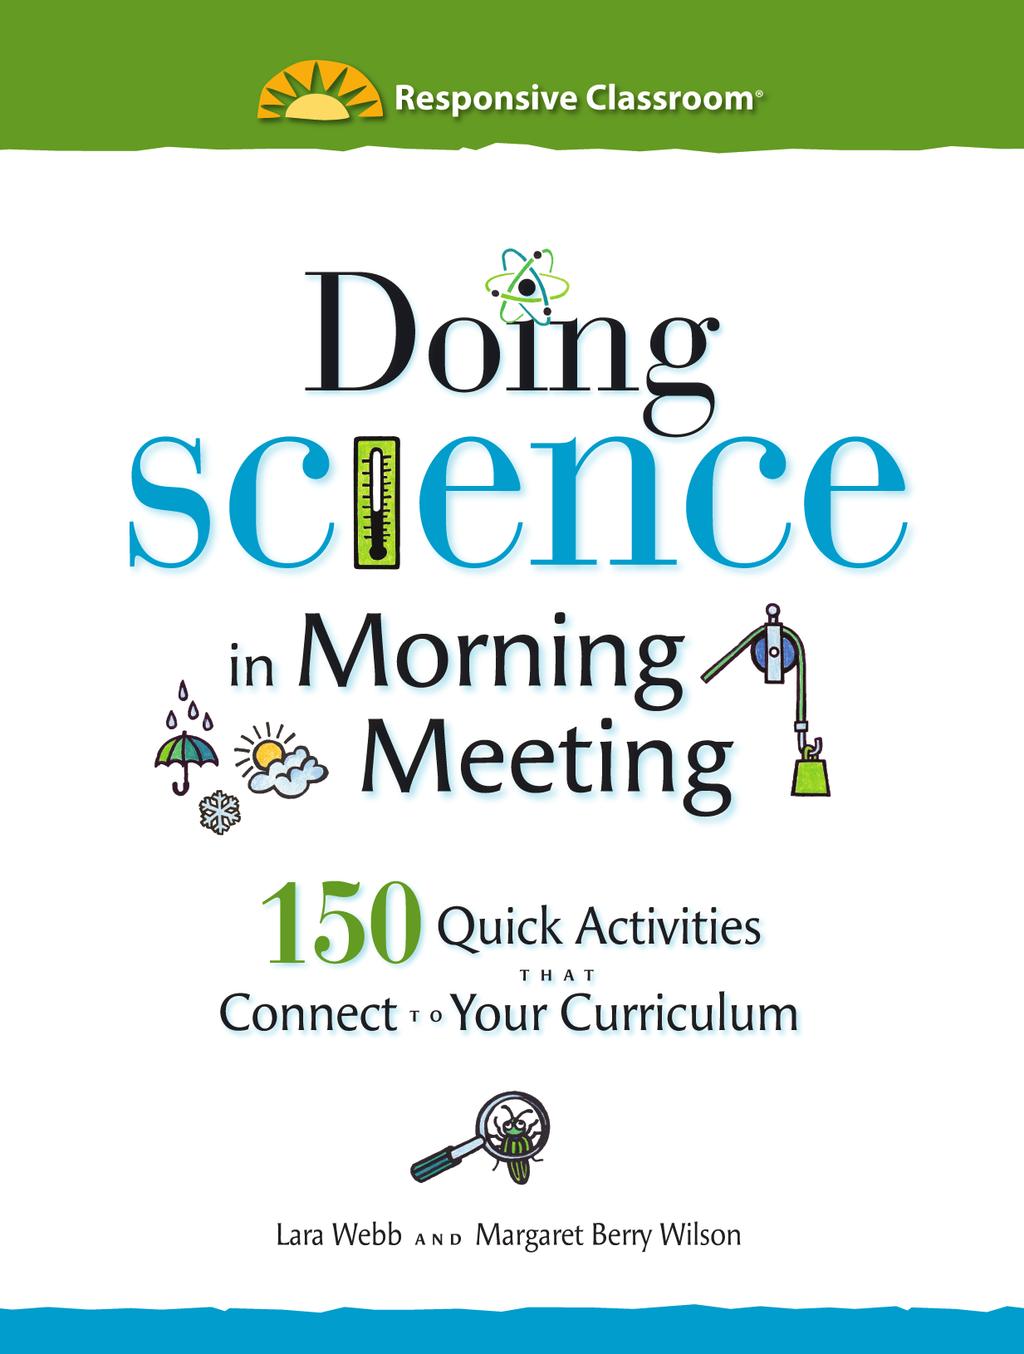 Note: Because this book is not intended to be a science curriculum, but to supplement your science curriculum, only those NGSS Performance Expectations addressed in